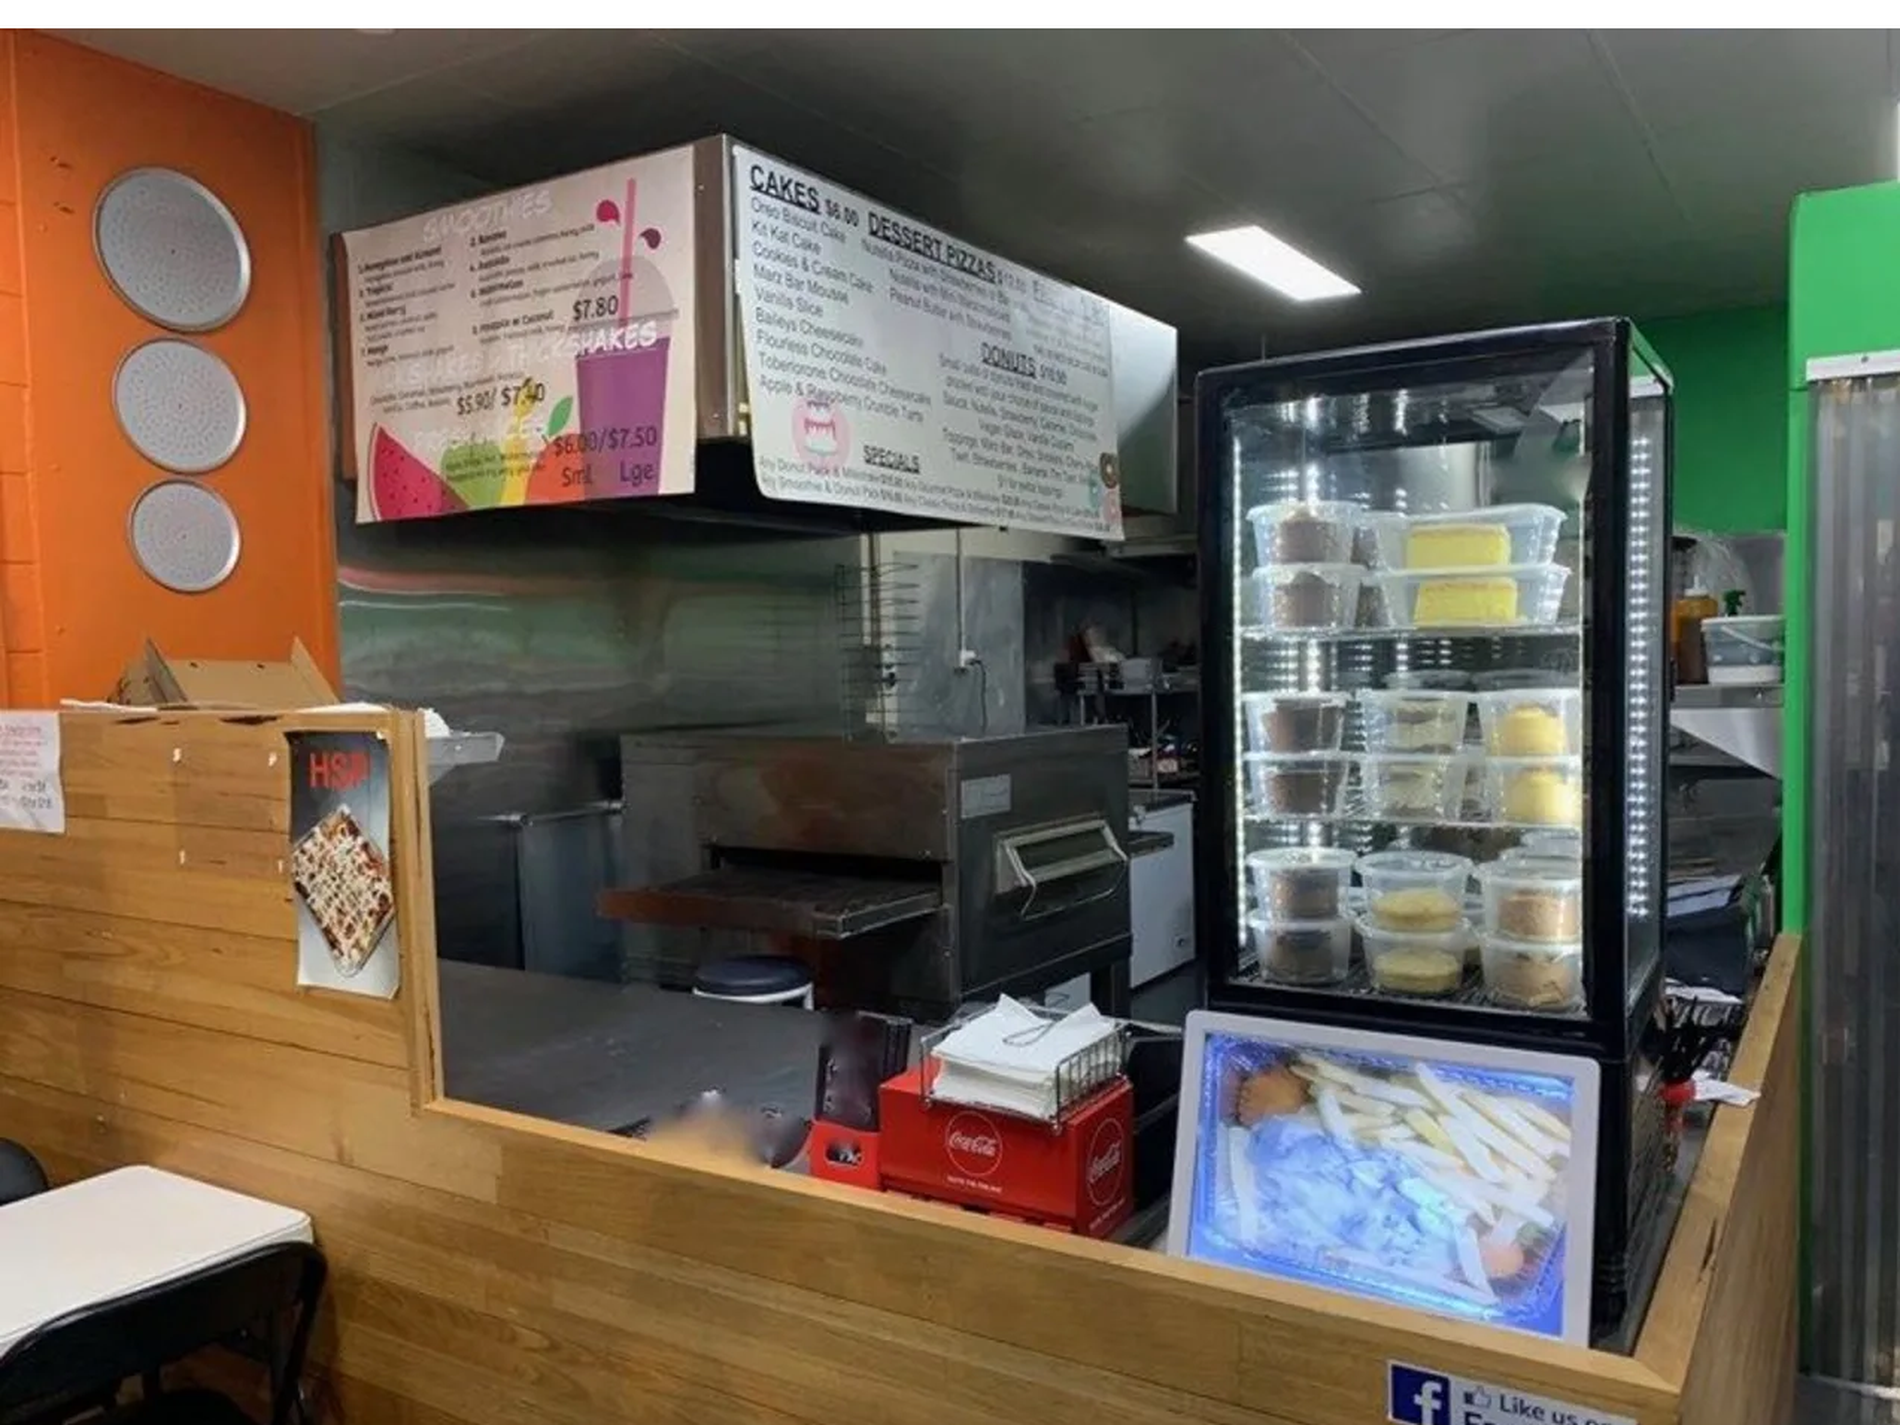 Canterbury Road Pizza Pasta Shop Business For Sale
